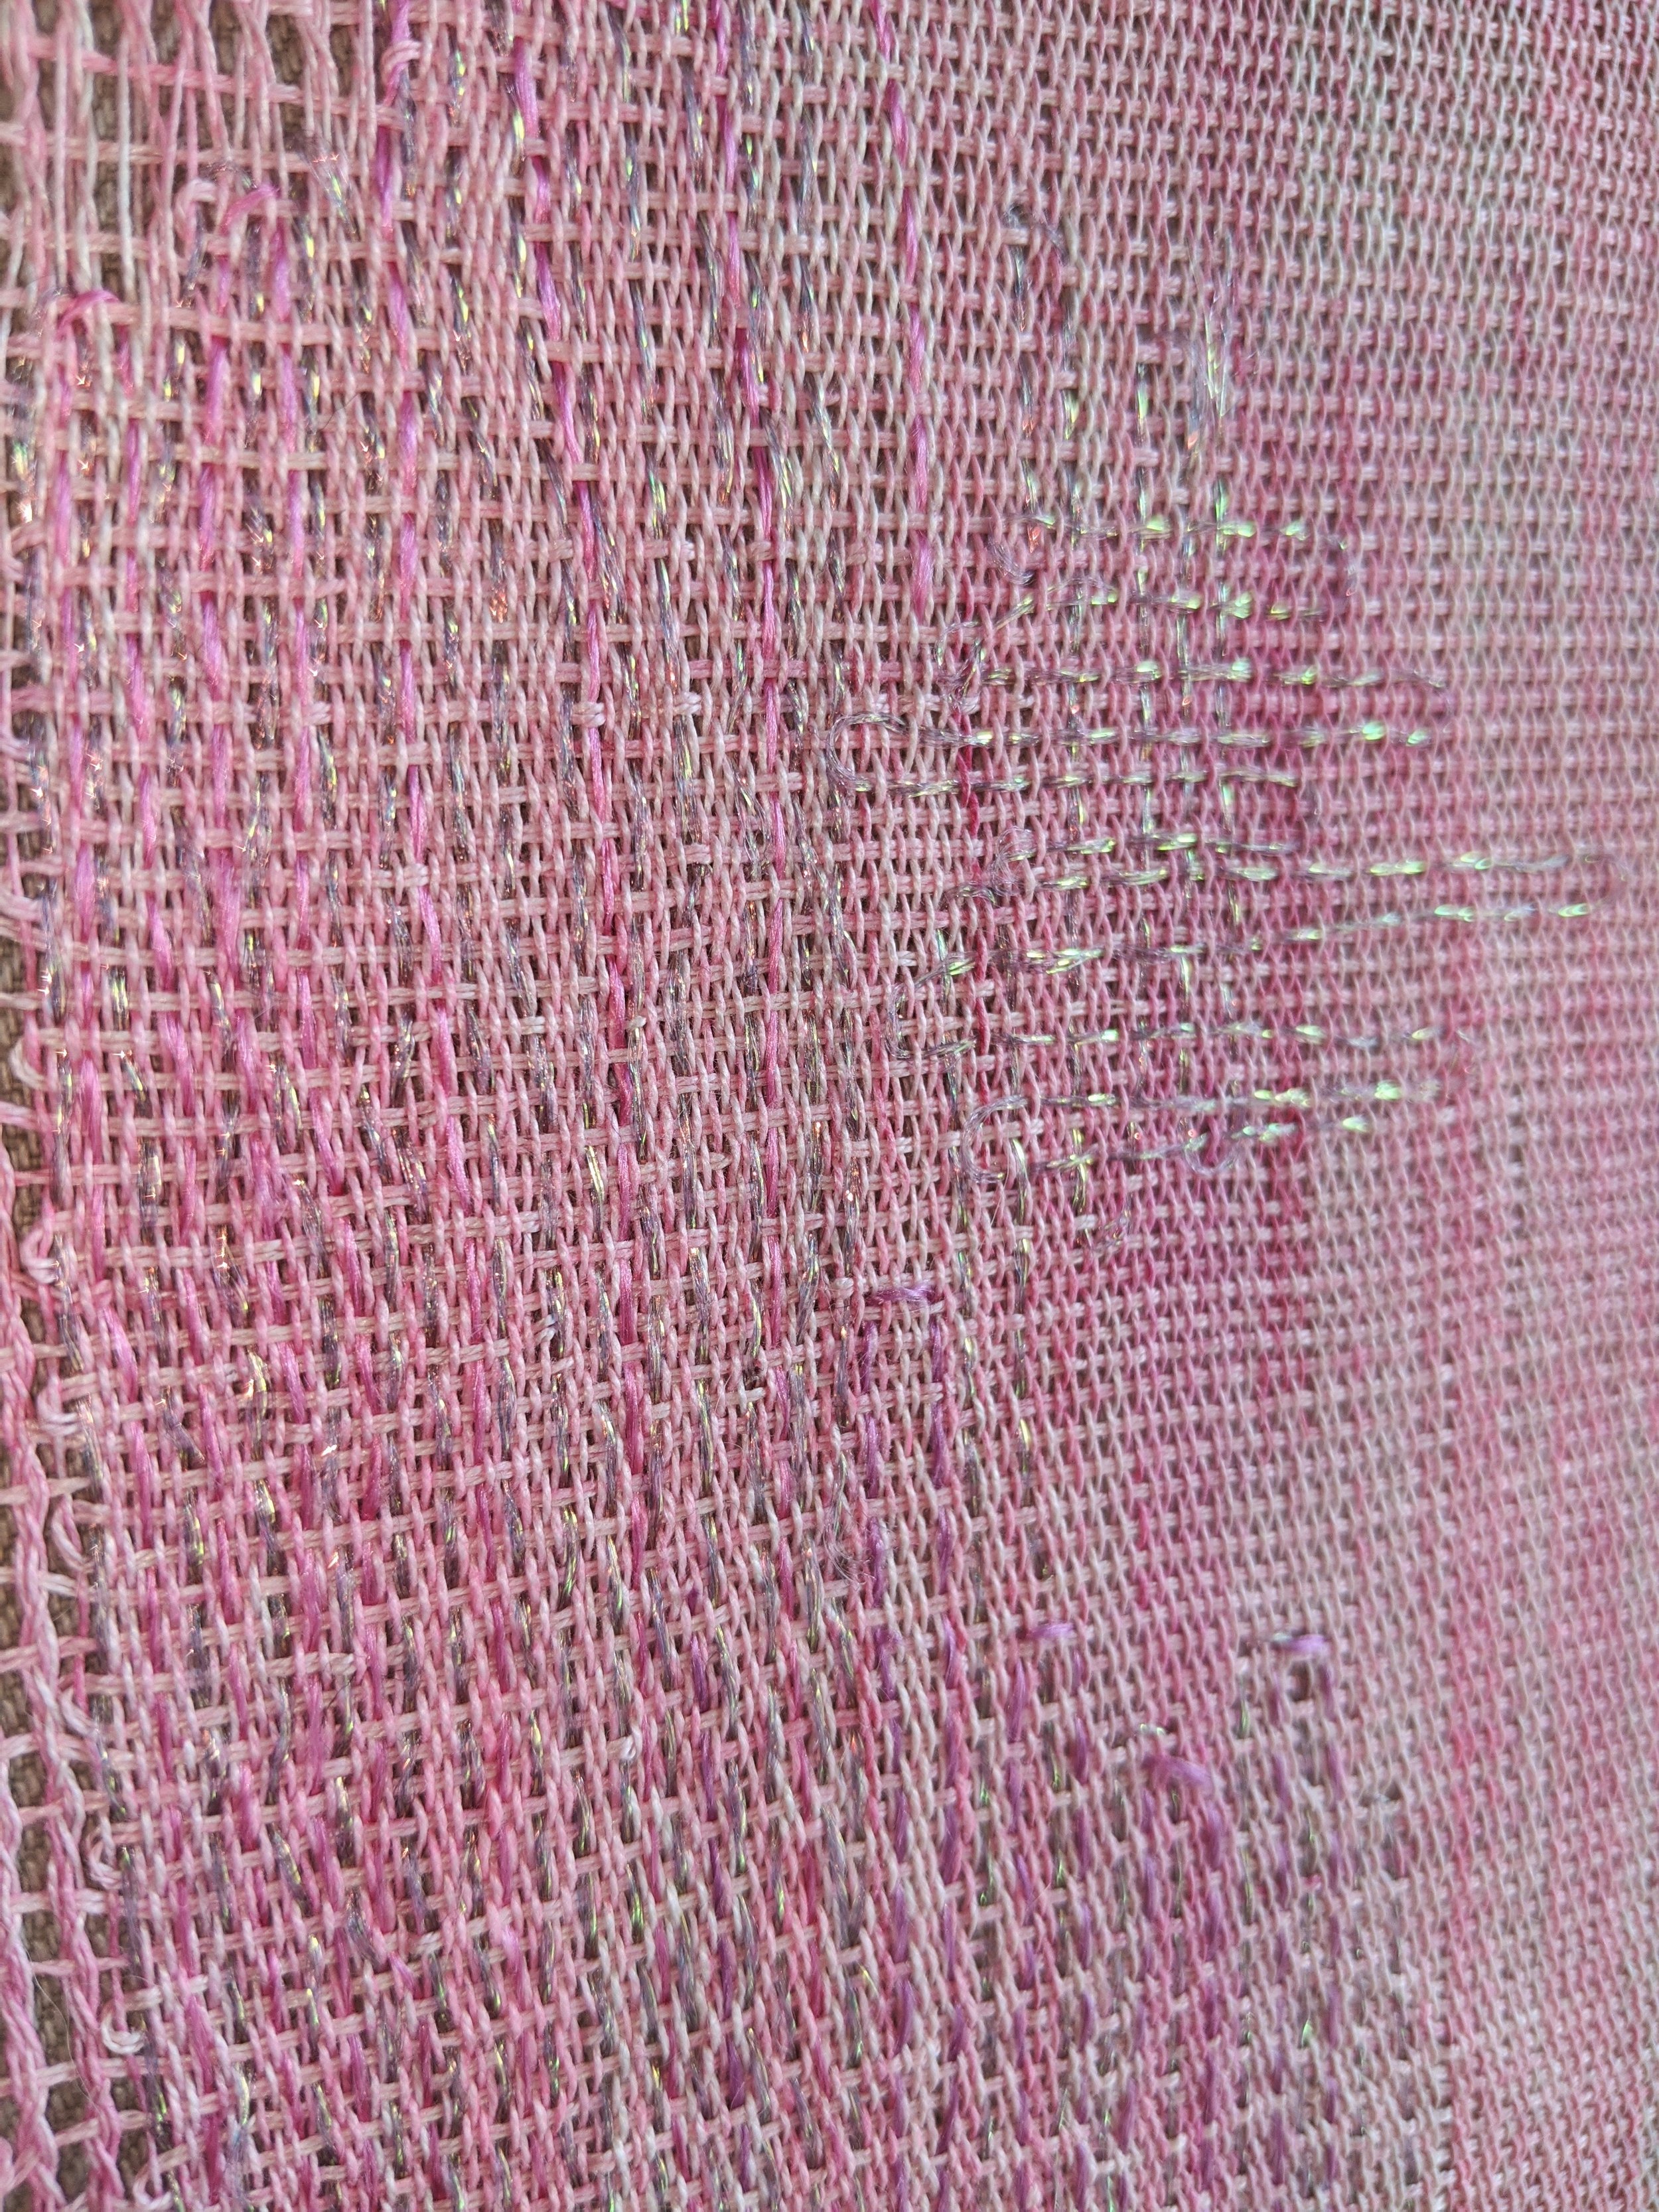  window/door/entrance/exit [detail] hand woven gauze; cotton, watercolor, iridescent embroidery thread  19 in x 10 in 2020  